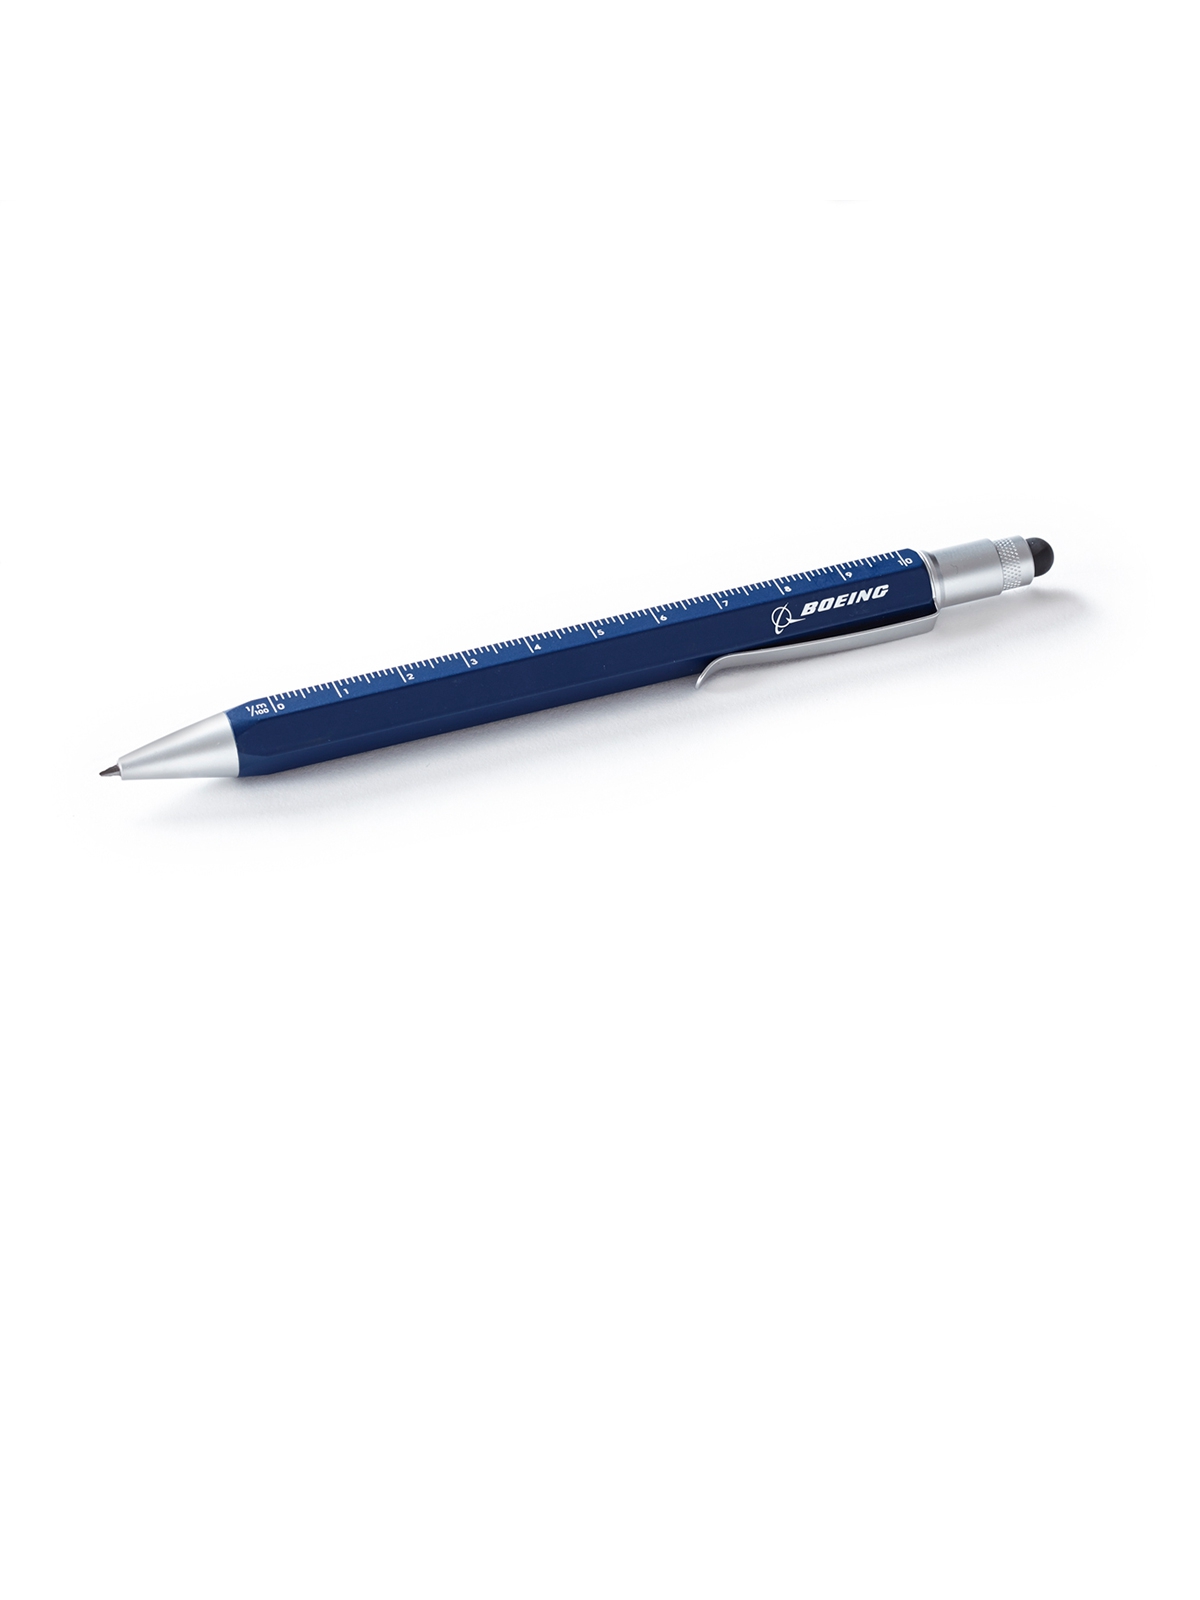 Boeing 2 In 1 Mechanical Pencil Tool - blue, with ruler and stylus